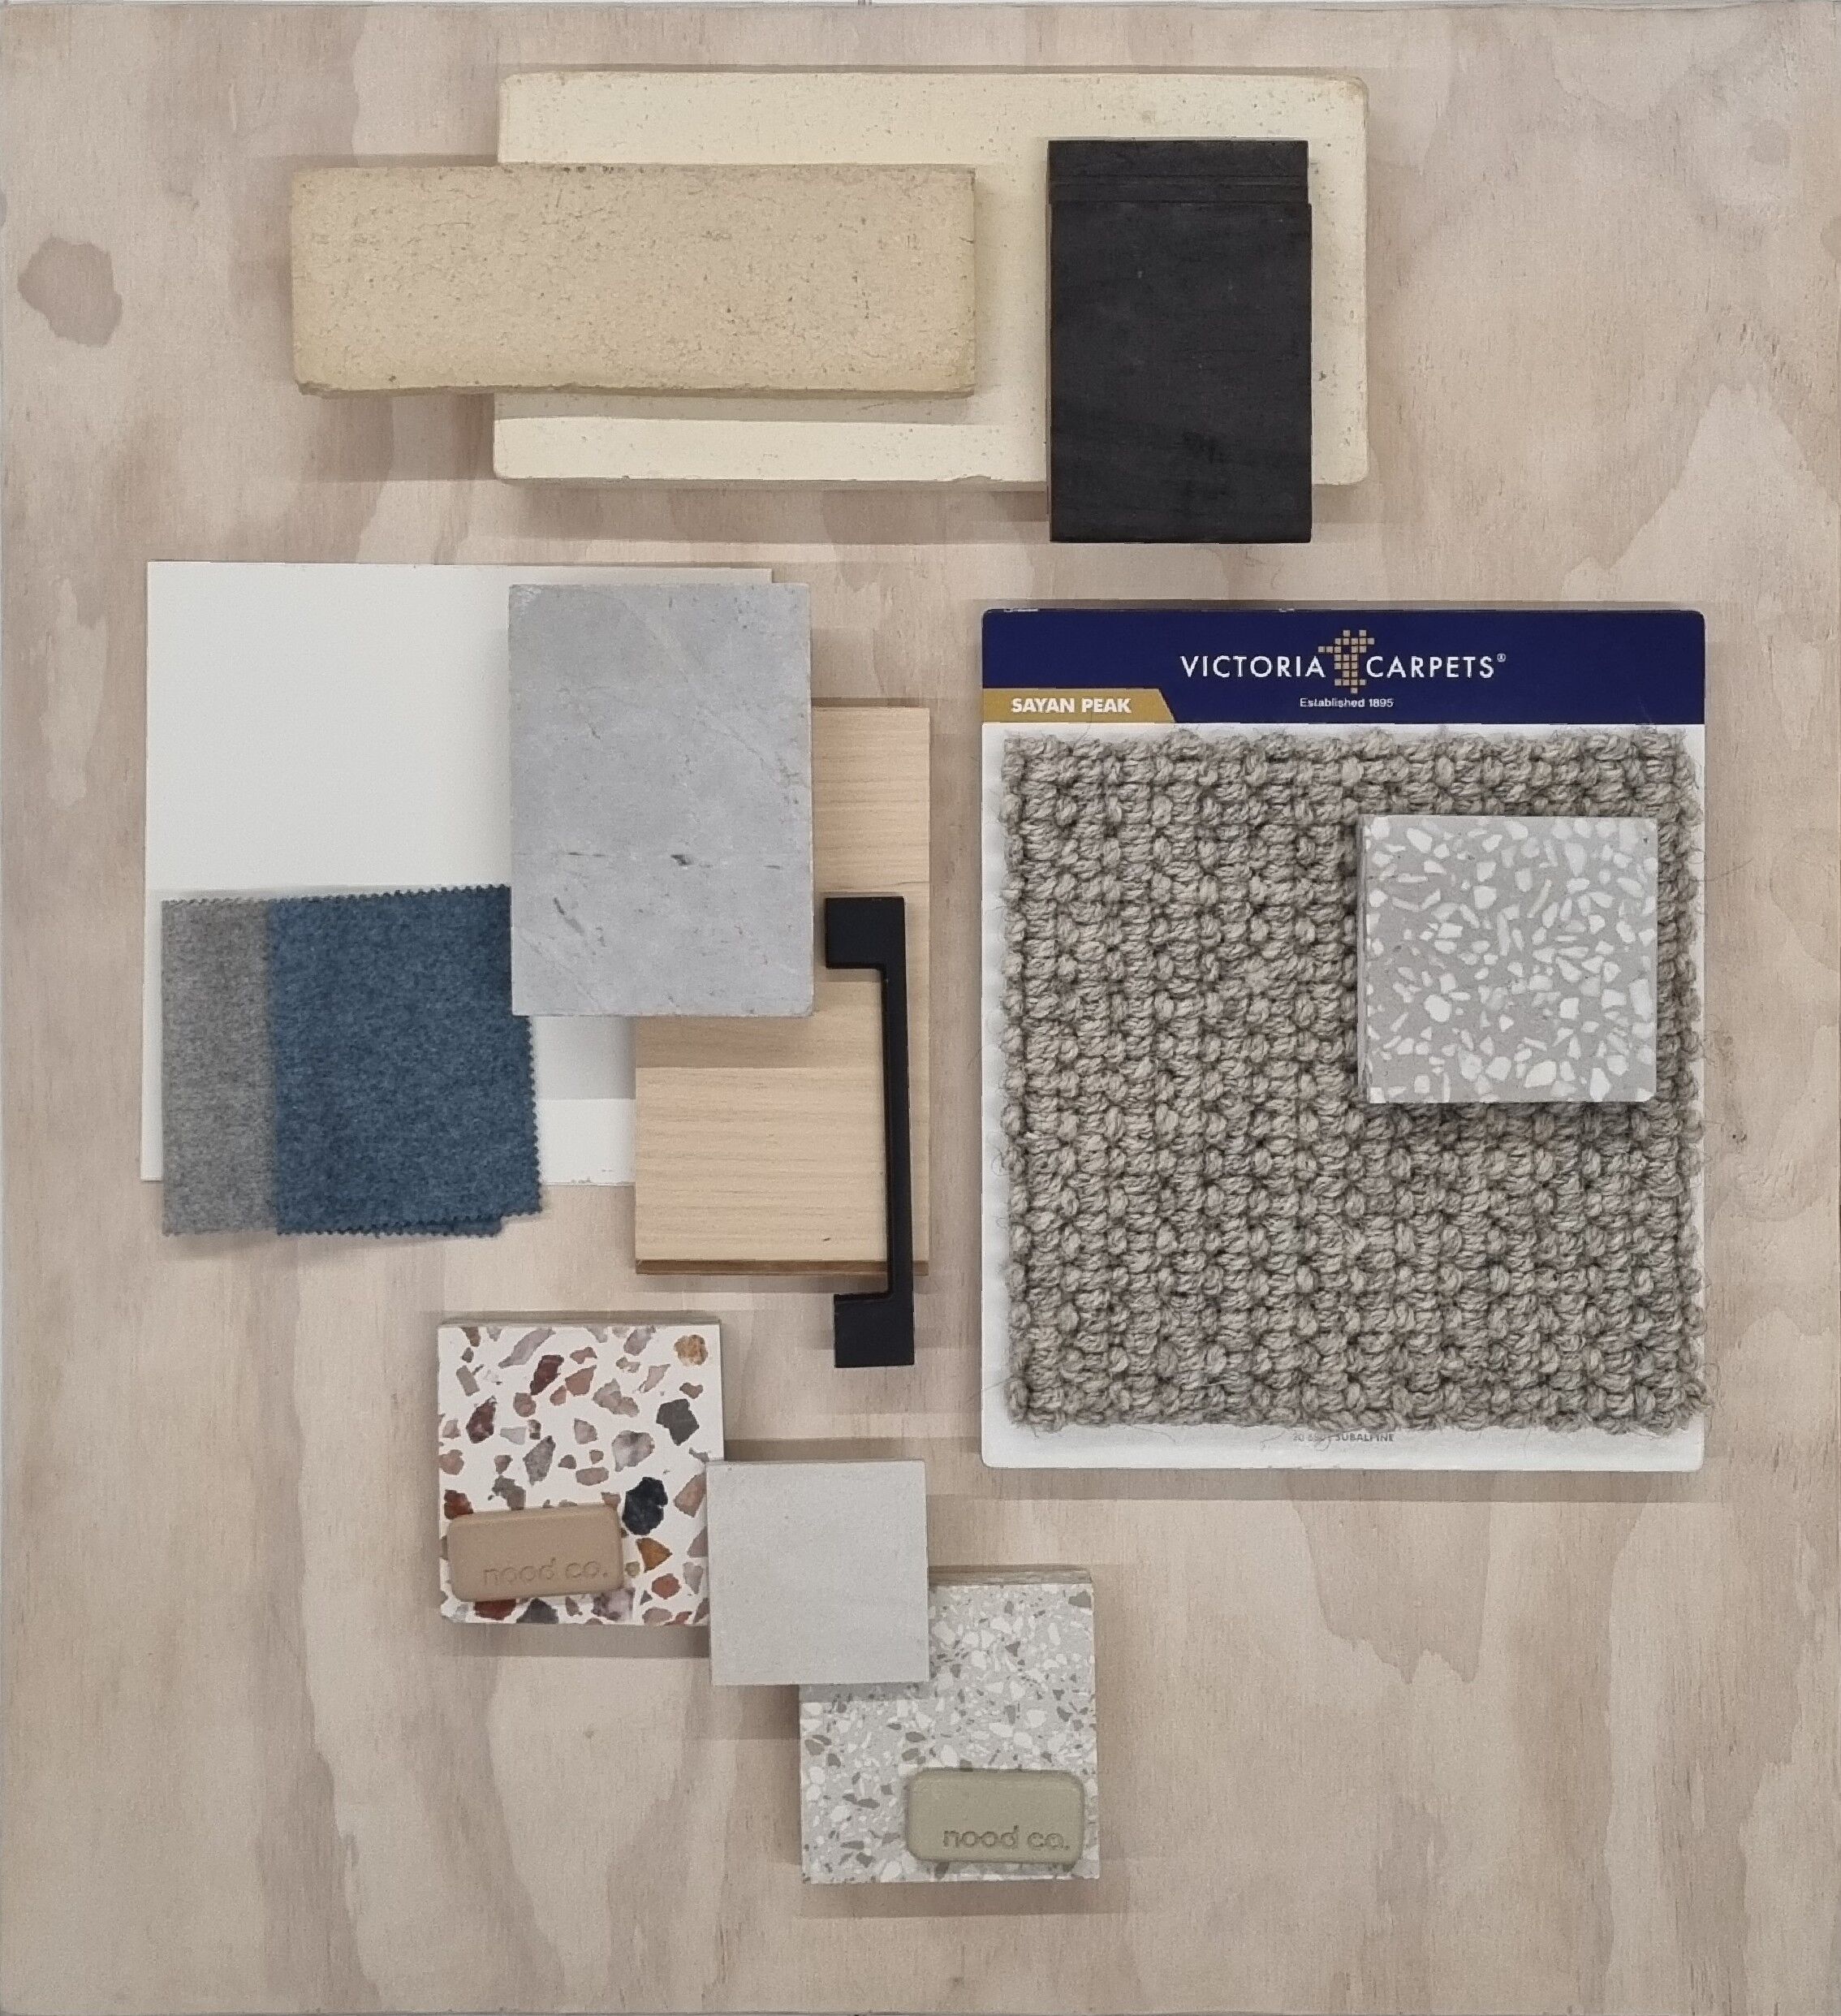 An arrangement of interior design samples including various tiles, woods, and carpet textures on a wooden surface.